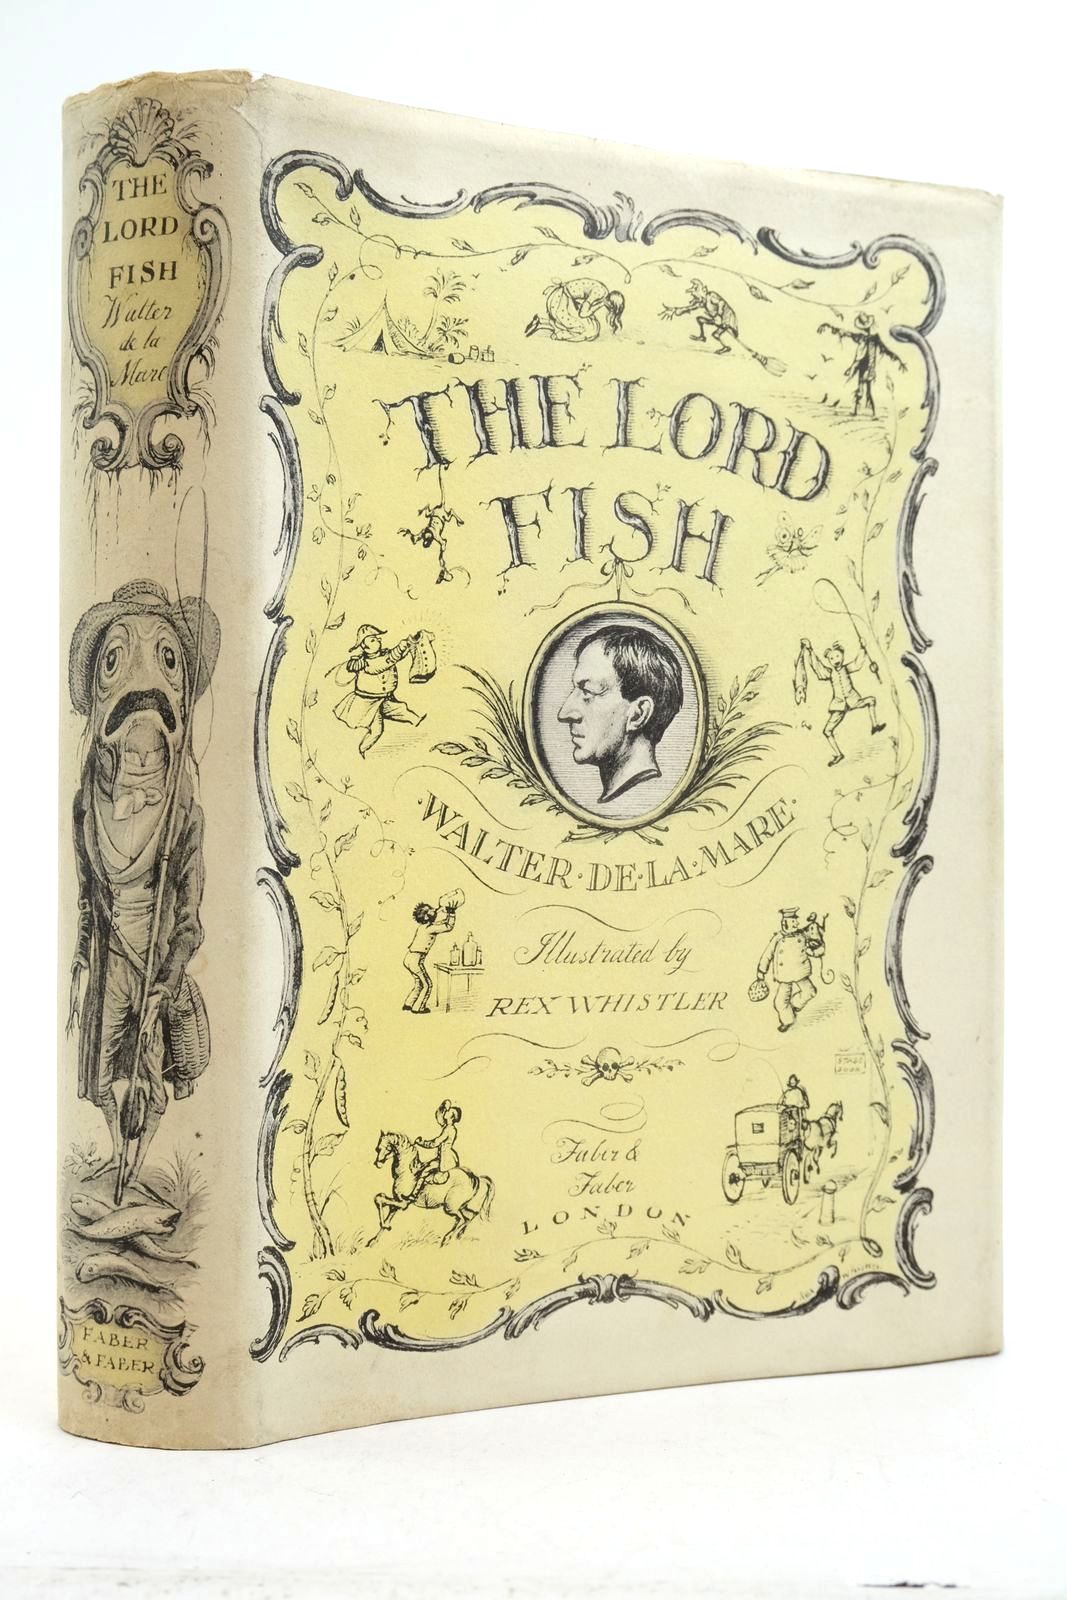 Photo of THE LORD FISH written by De La Mare, Walter illustrated by Whistler, Rex published by Faber &amp; Faber (STOCK CODE: 2139508)  for sale by Stella & Rose's Books